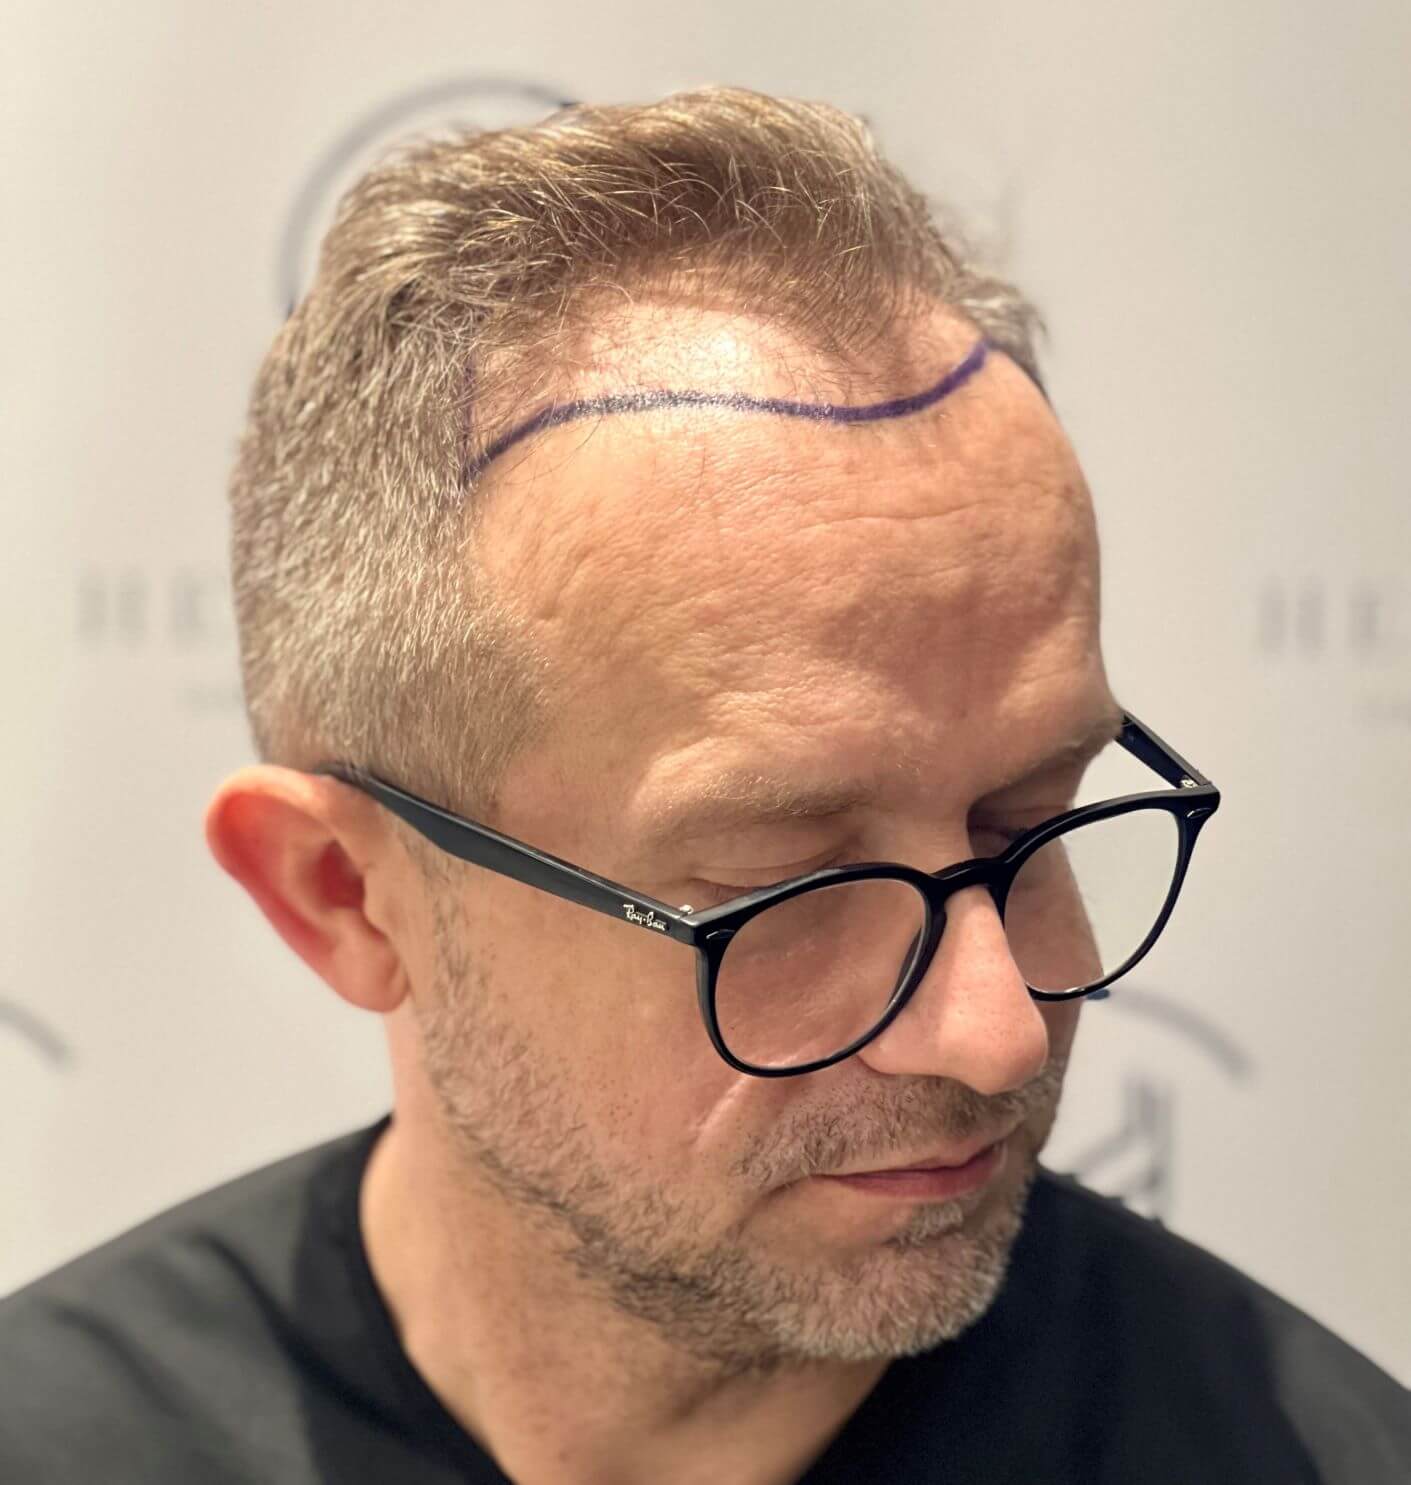 The Buzz on Buzz Cuts The Latest Hair Transplant Trend